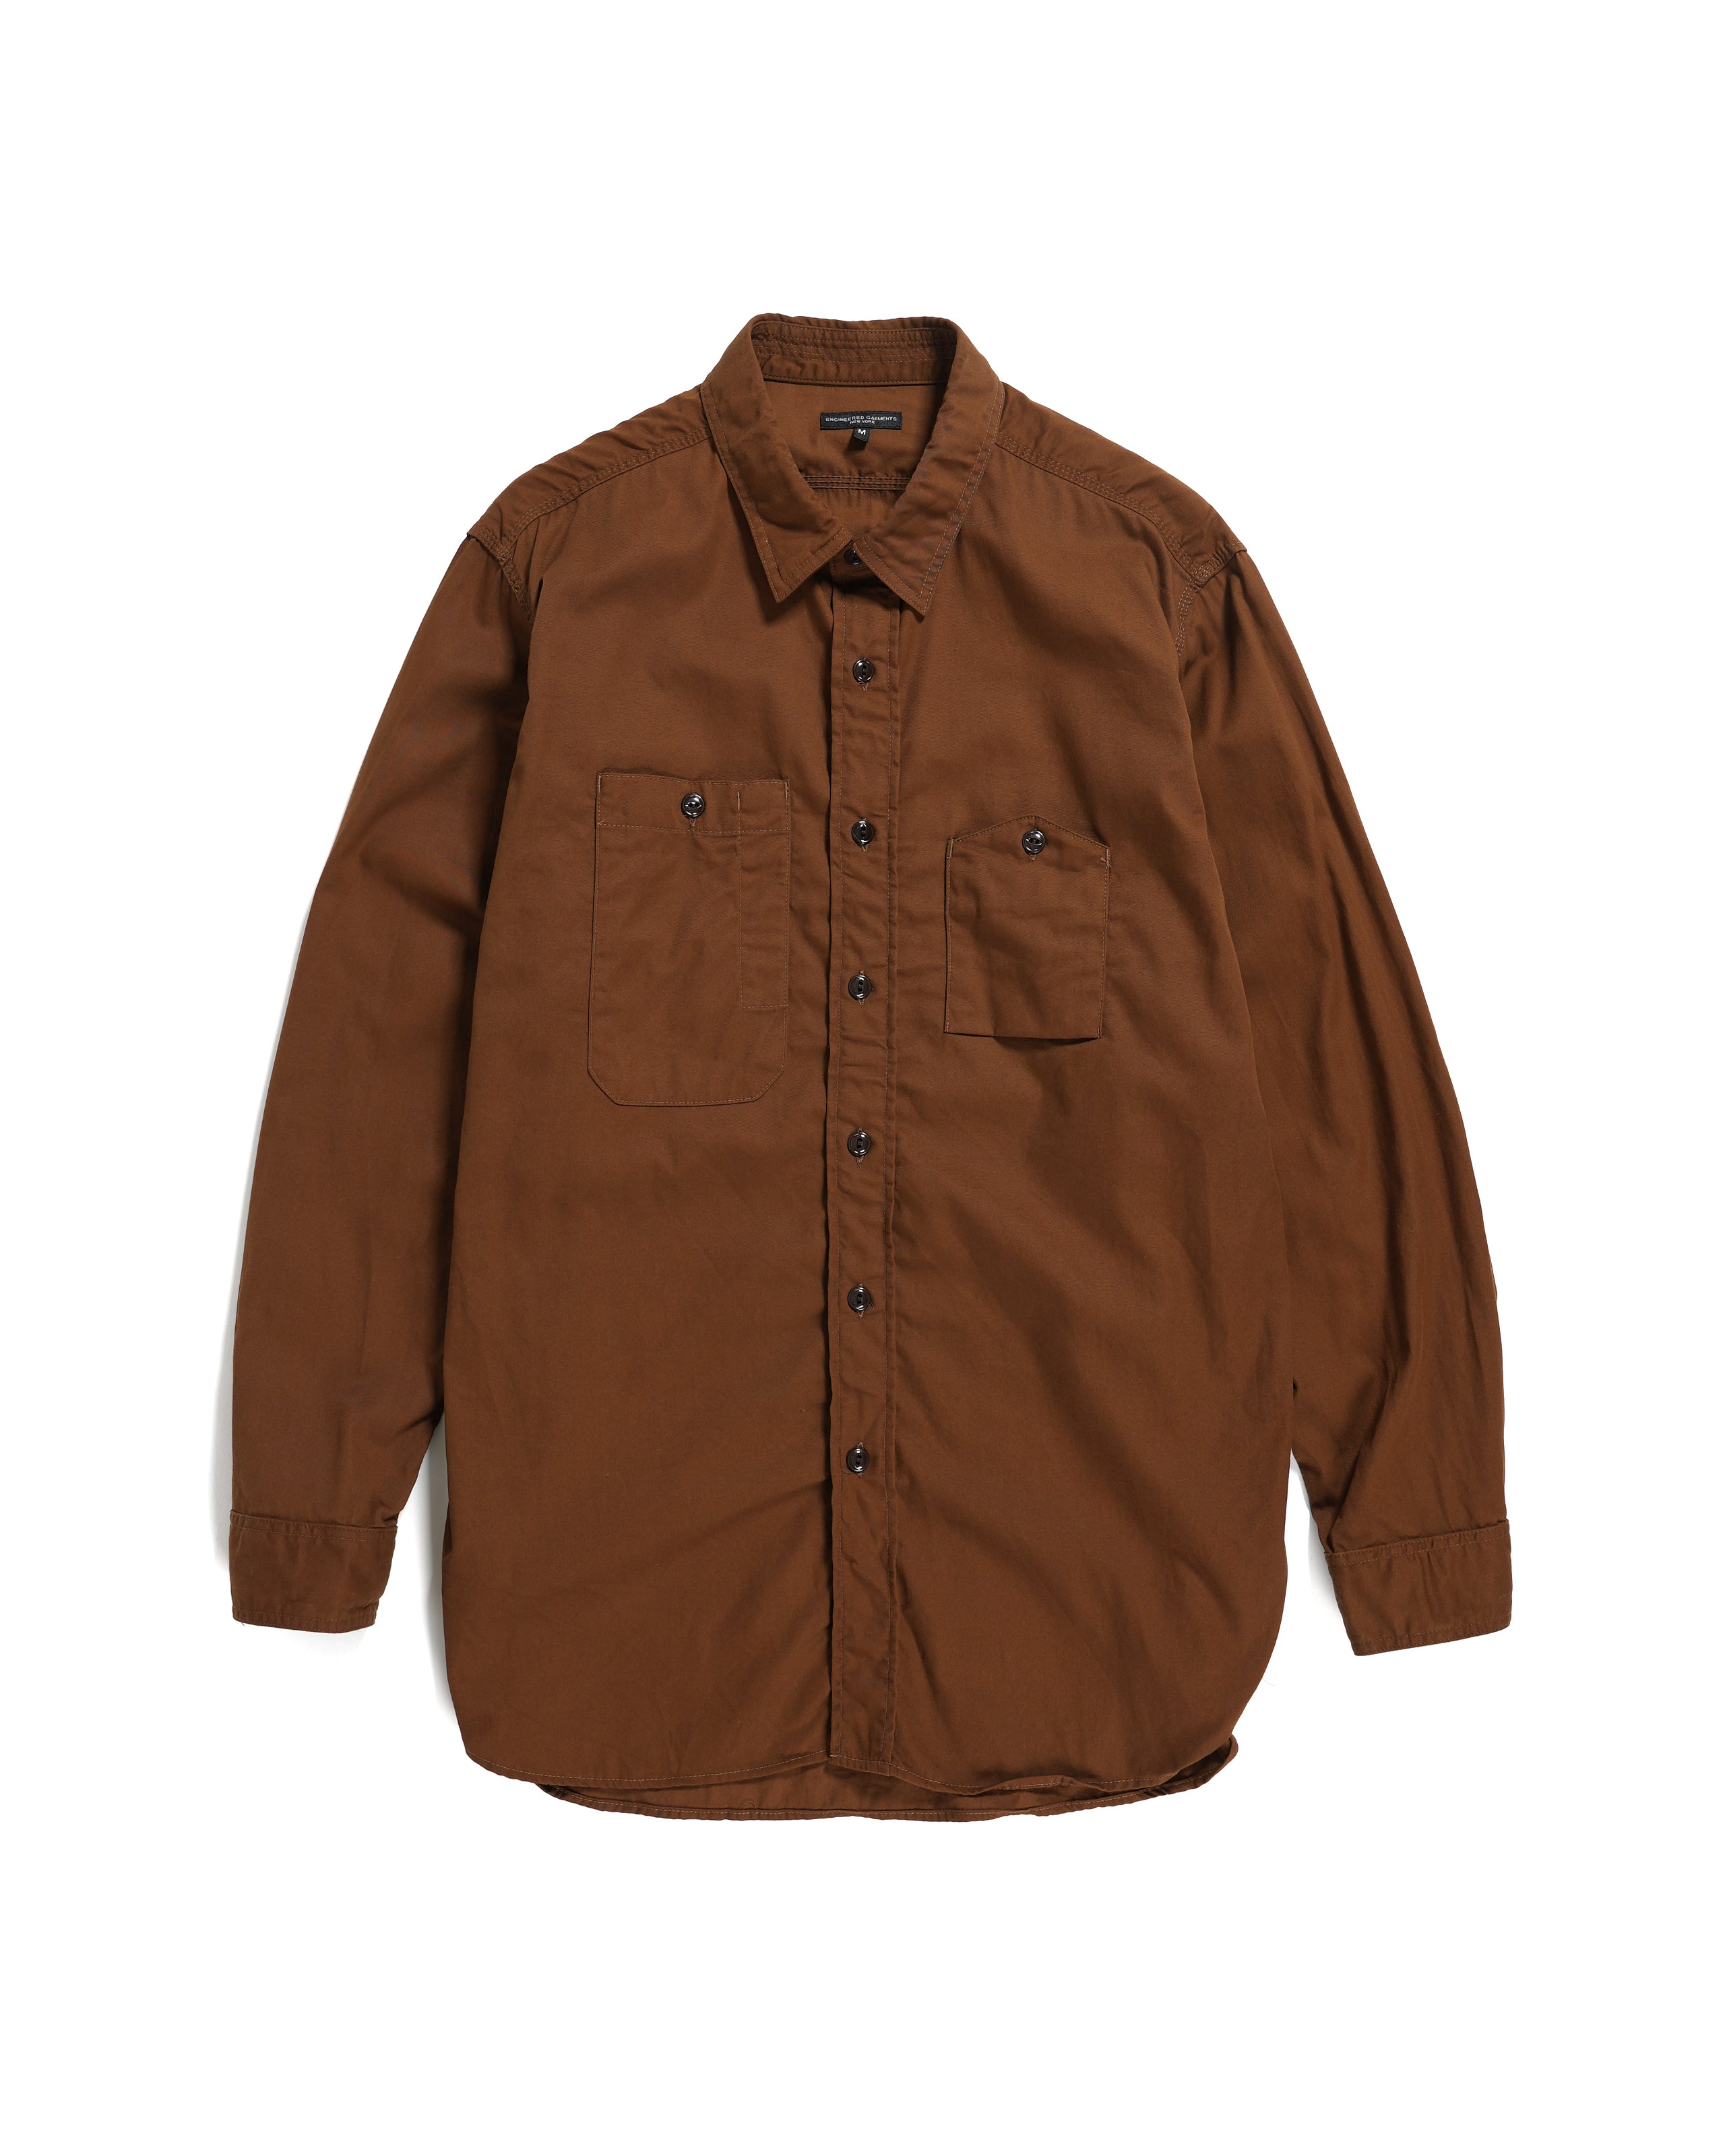 Work Shirt - Brown Cotton Micro Sanded Twill | Nepenthes New York